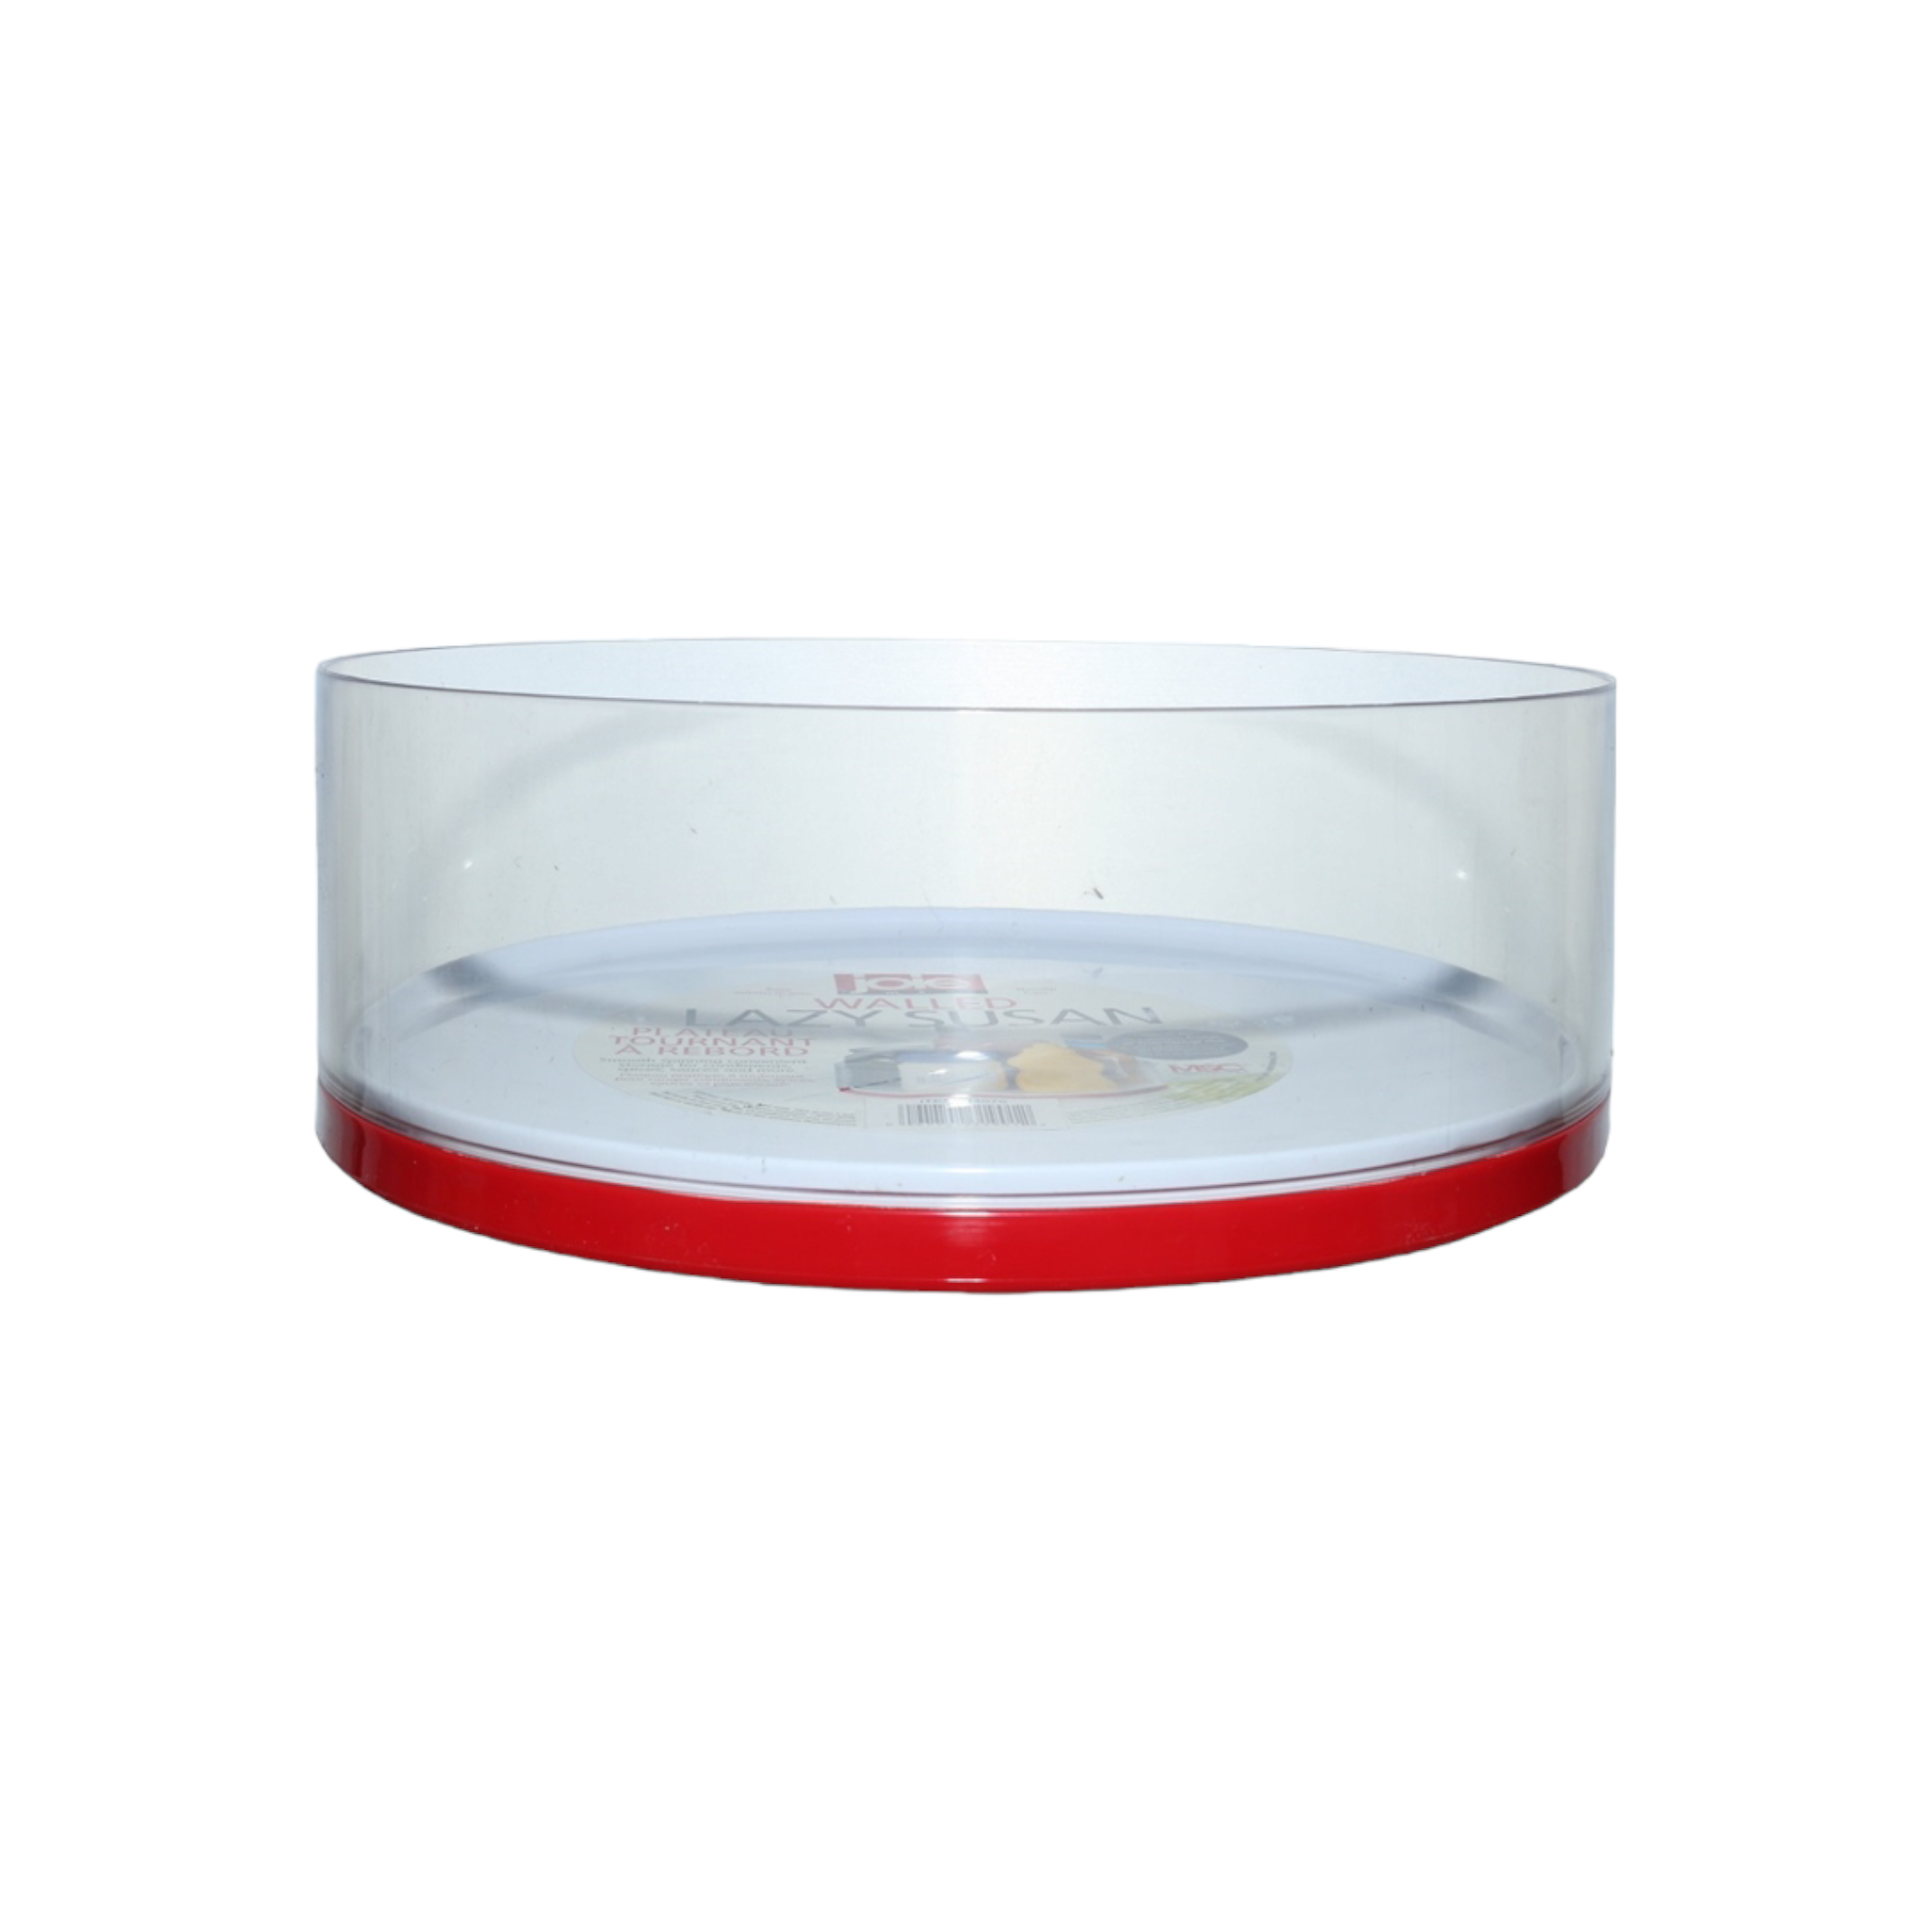 Joie Lazy Susan Server Saver Turntable with Cover Walled Red 14076